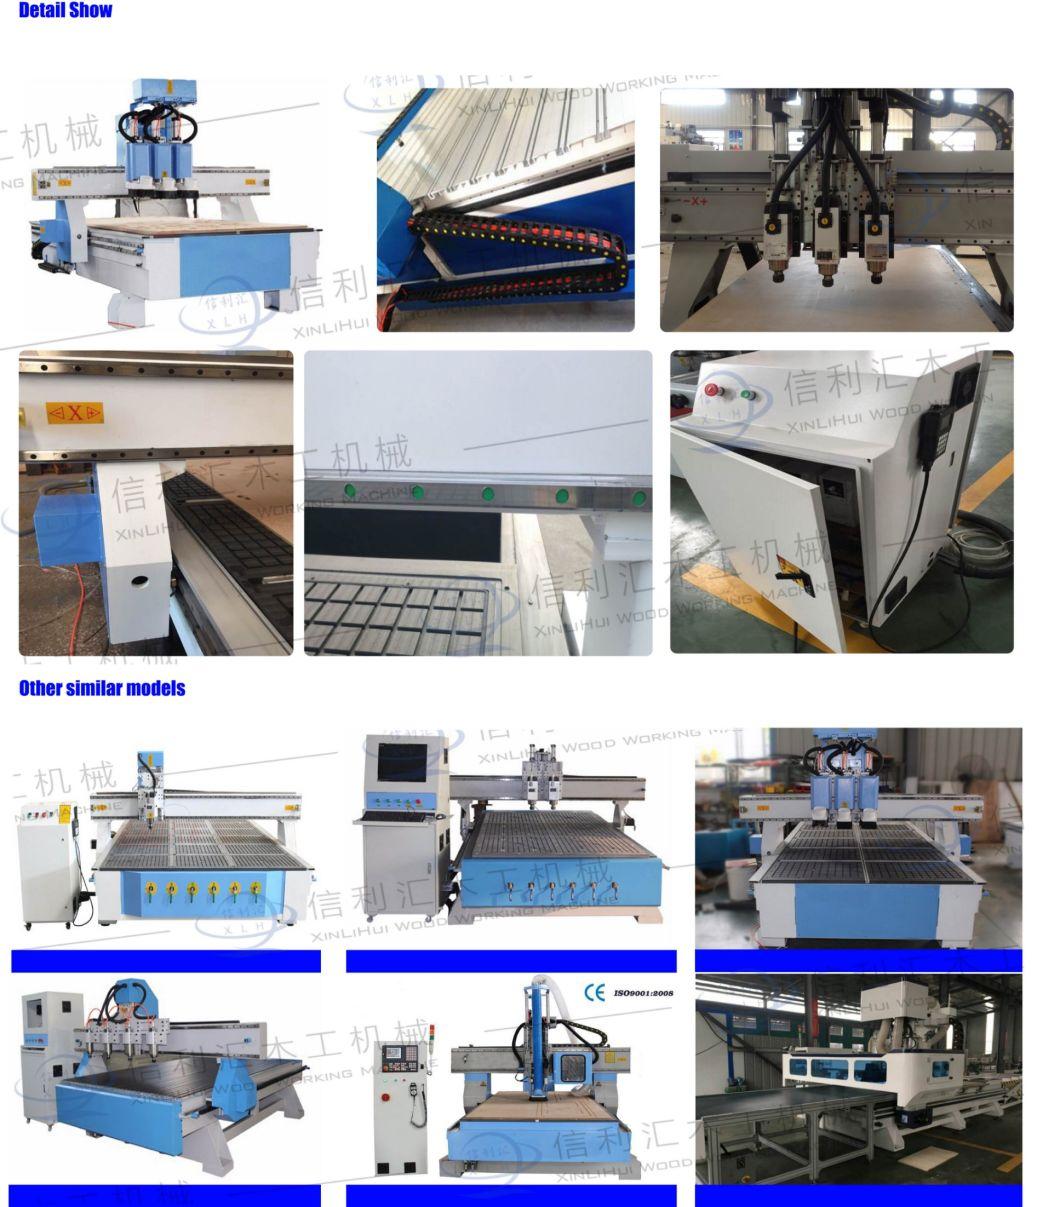 Panel Shaper Cutter, Raised Panel Kitchen Cabinet, Raised Panel, Spindle Raise Panel Cutters, Raised Panel for Wood, Panel Composite